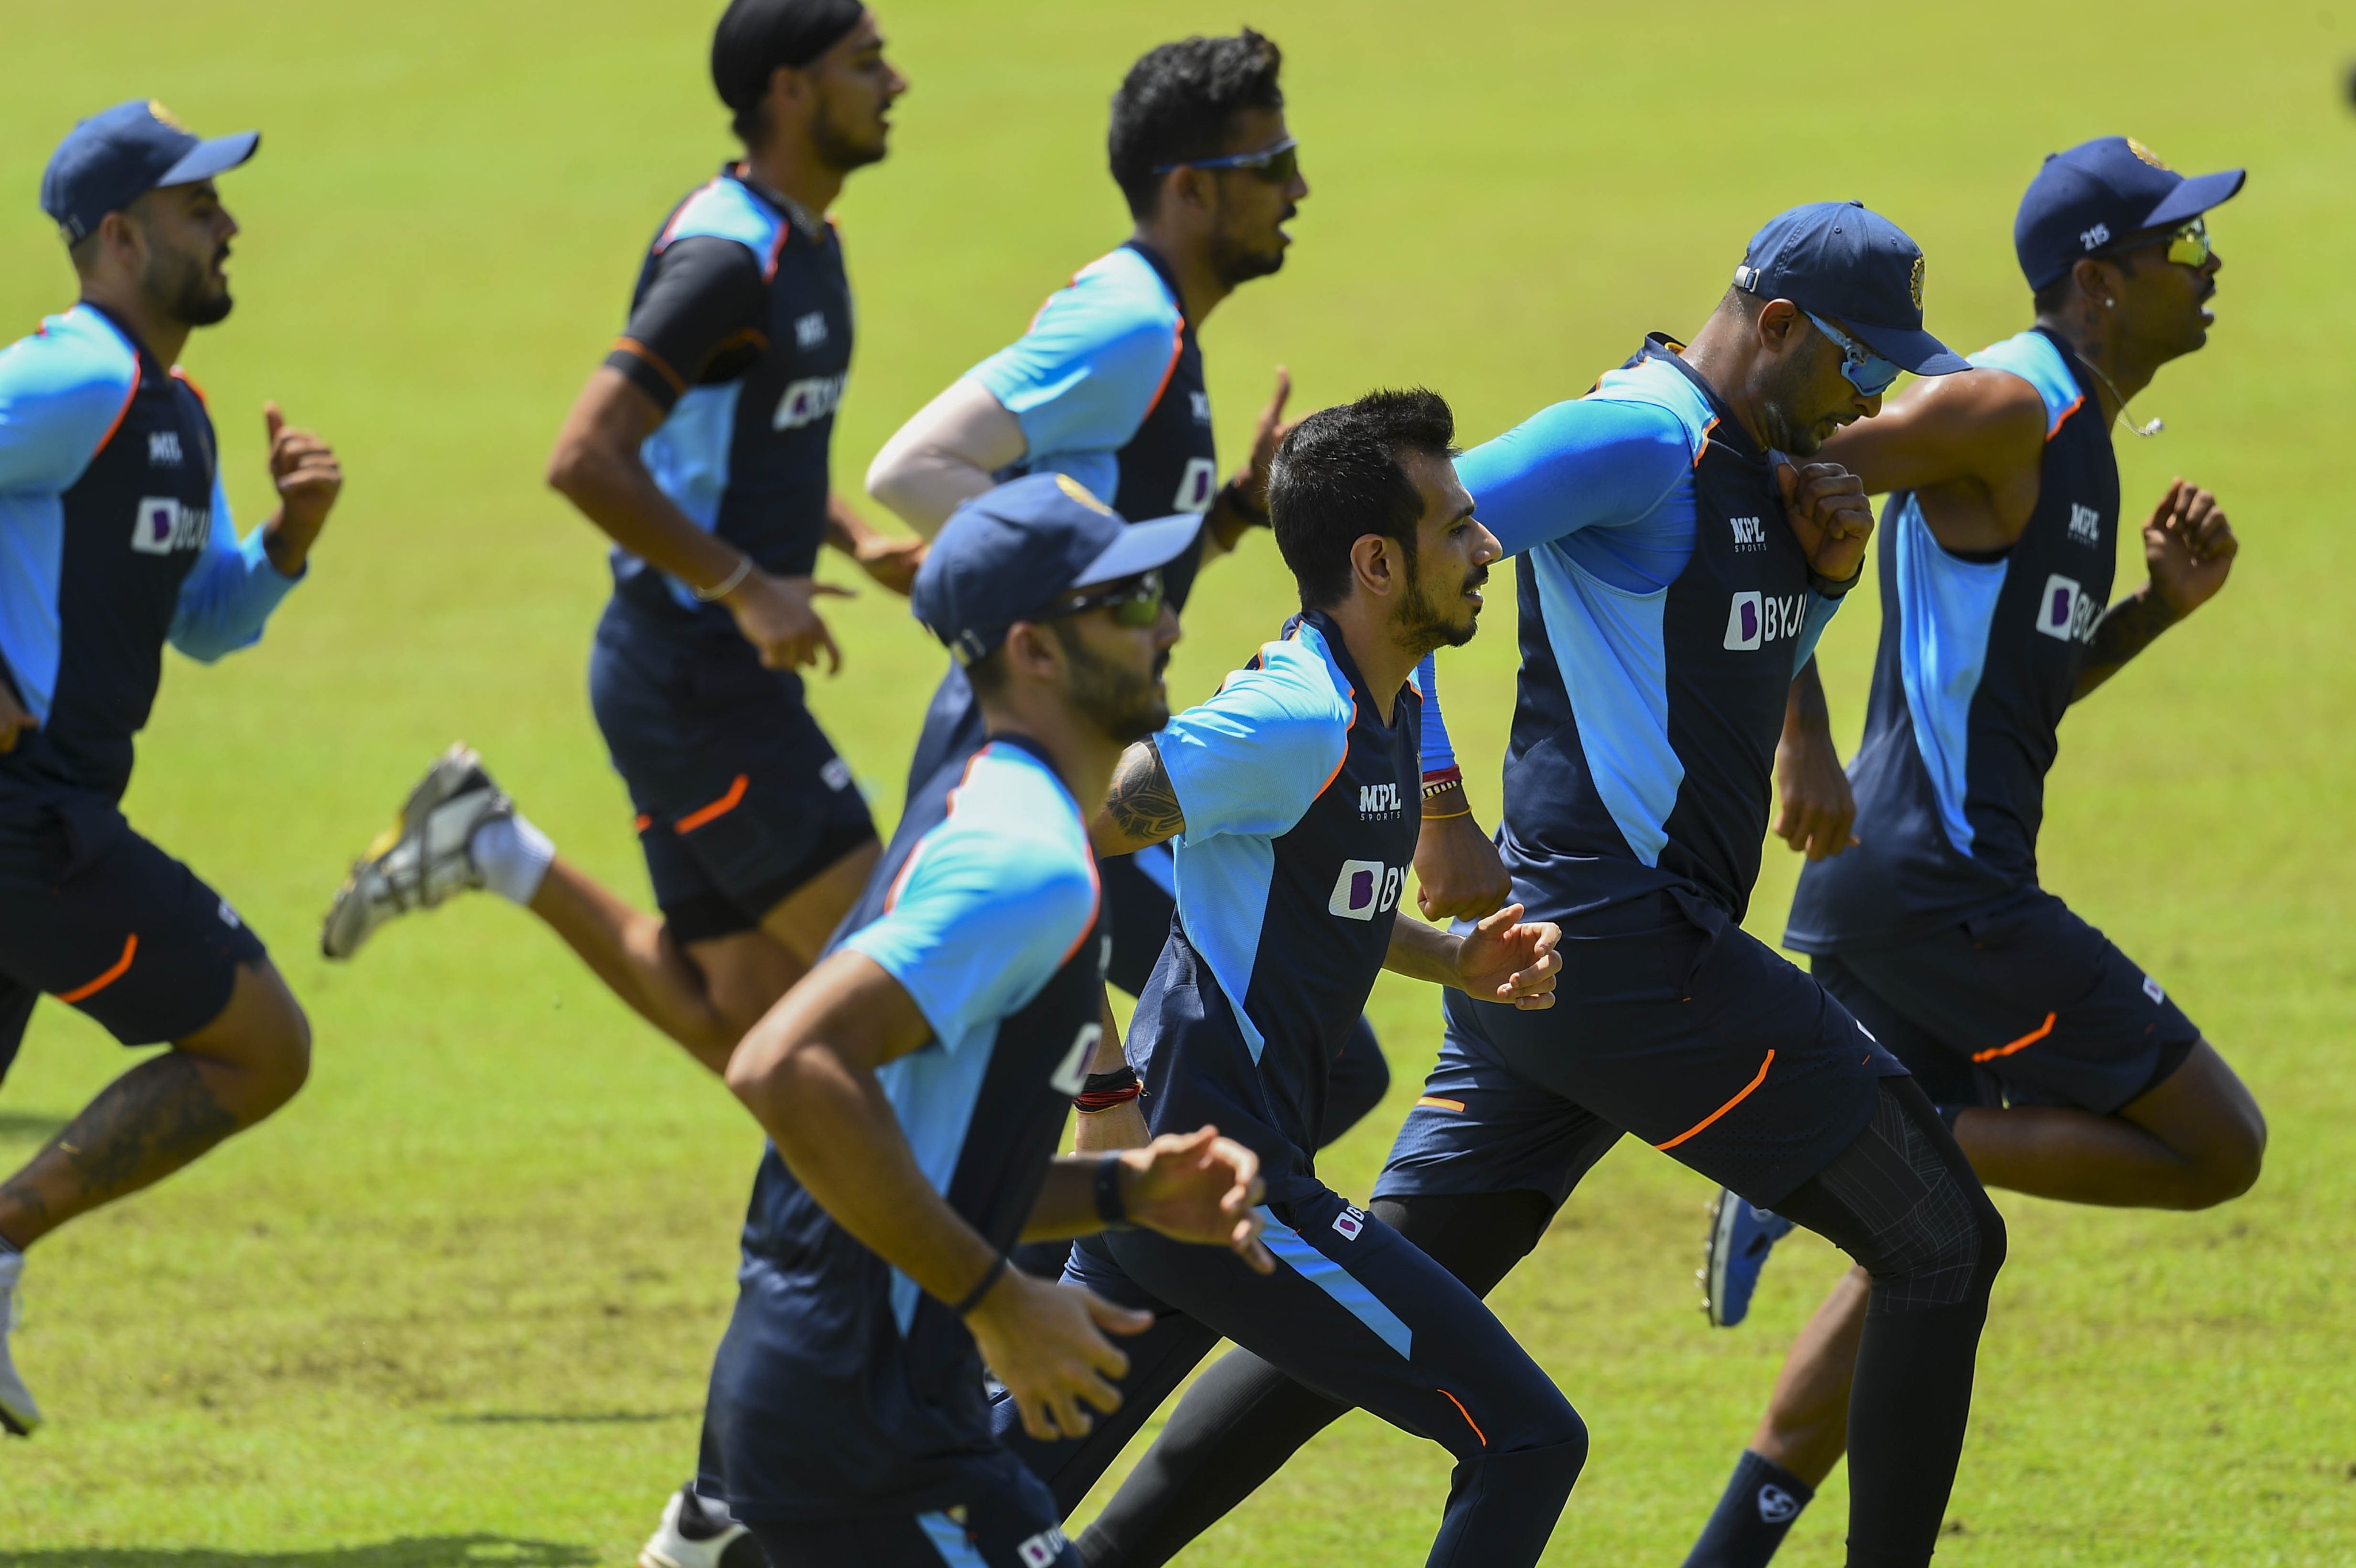 Indian team is the favorite to win both the trophies in Sri Lanka | BCCI Twitter